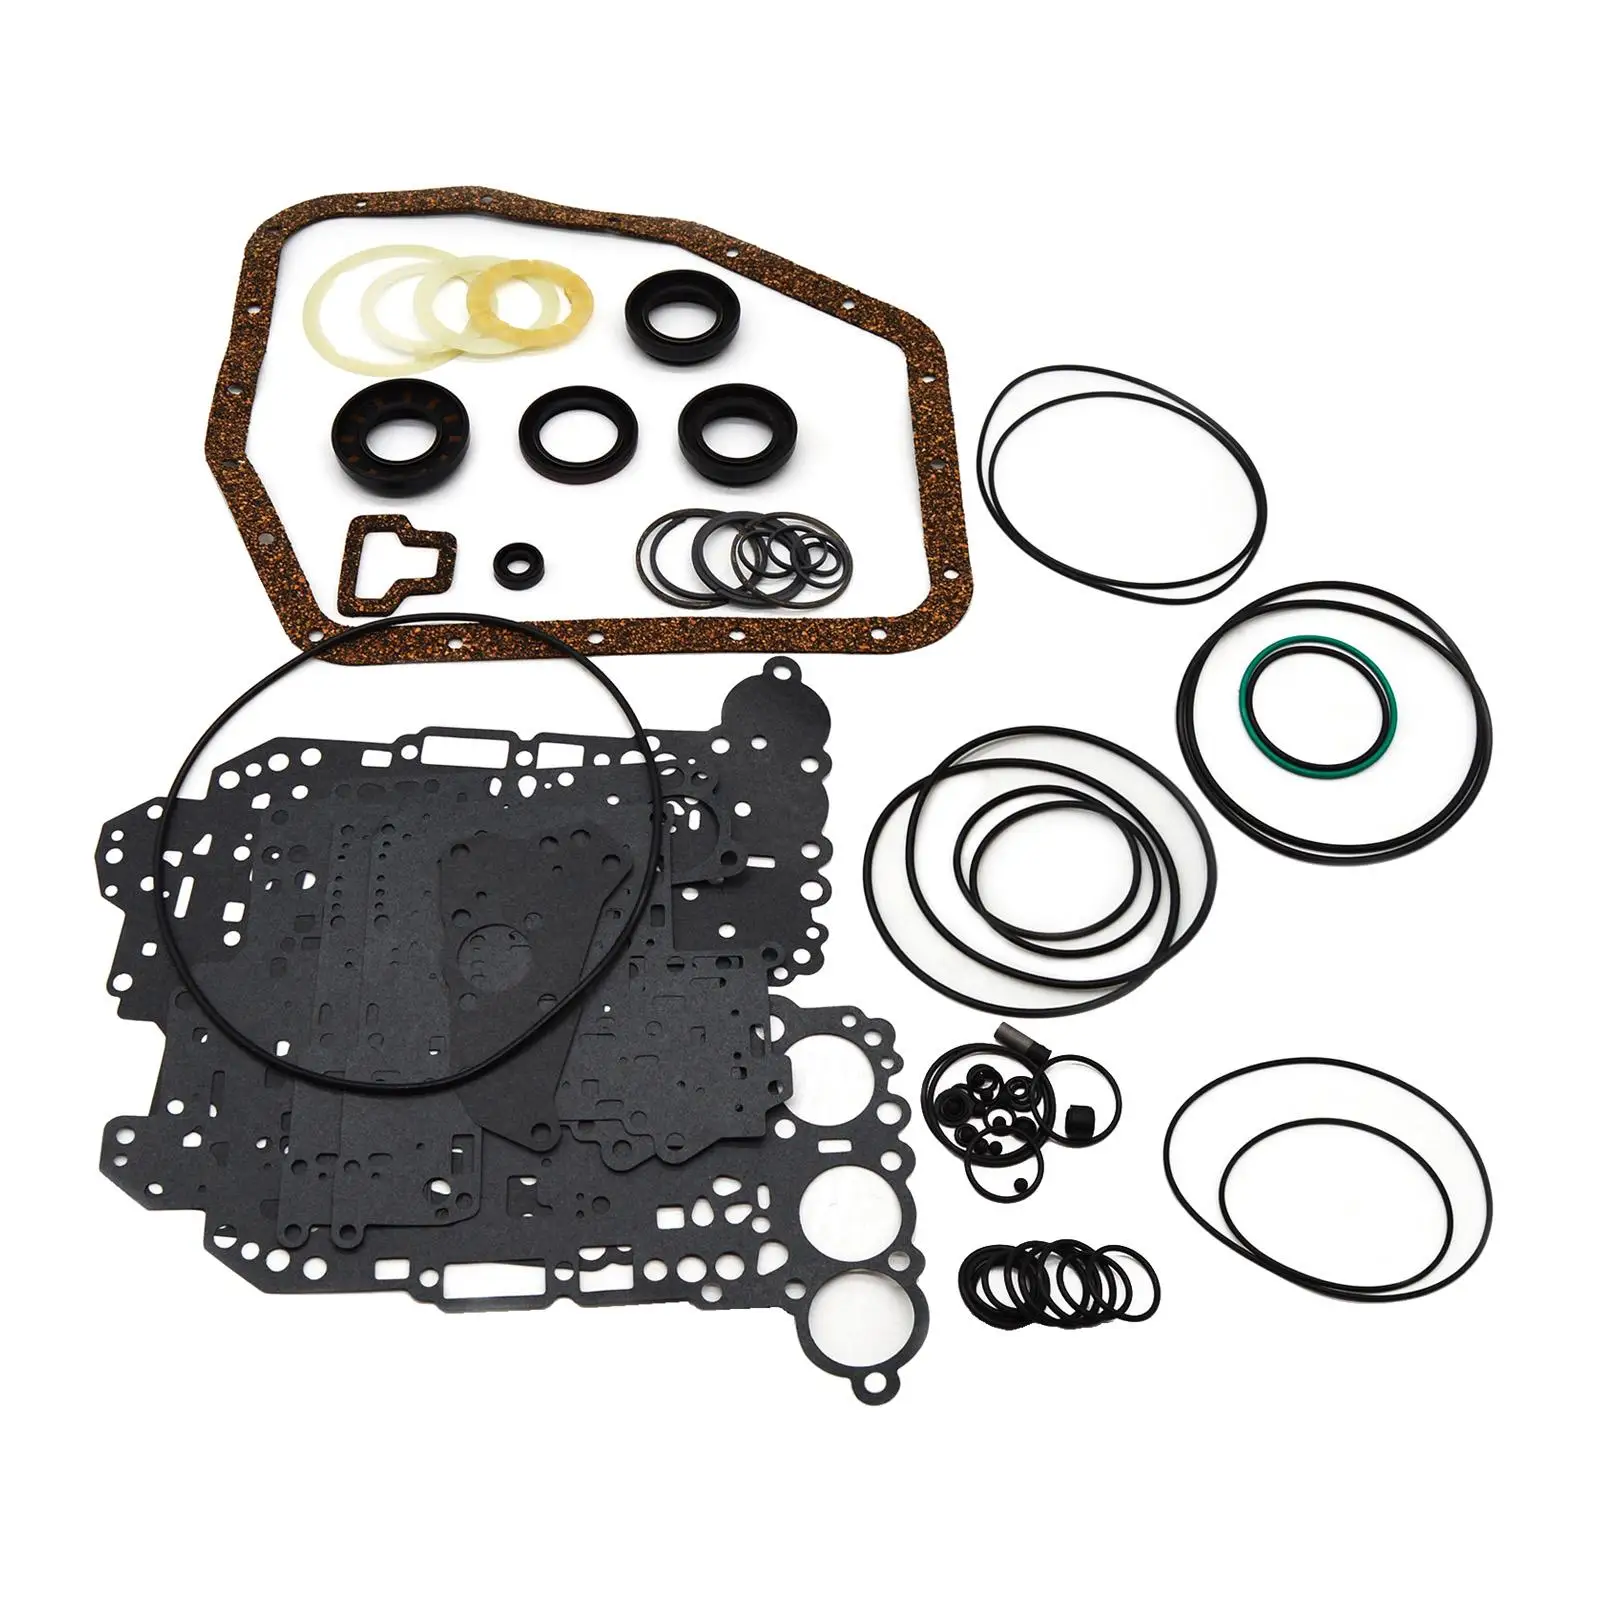 Overhaul Rebuild Kit Automatic Seals Tap Gaskets Minor Repair Kit Transmission Overhaul Kit Replacements for 7A-Fe A245E